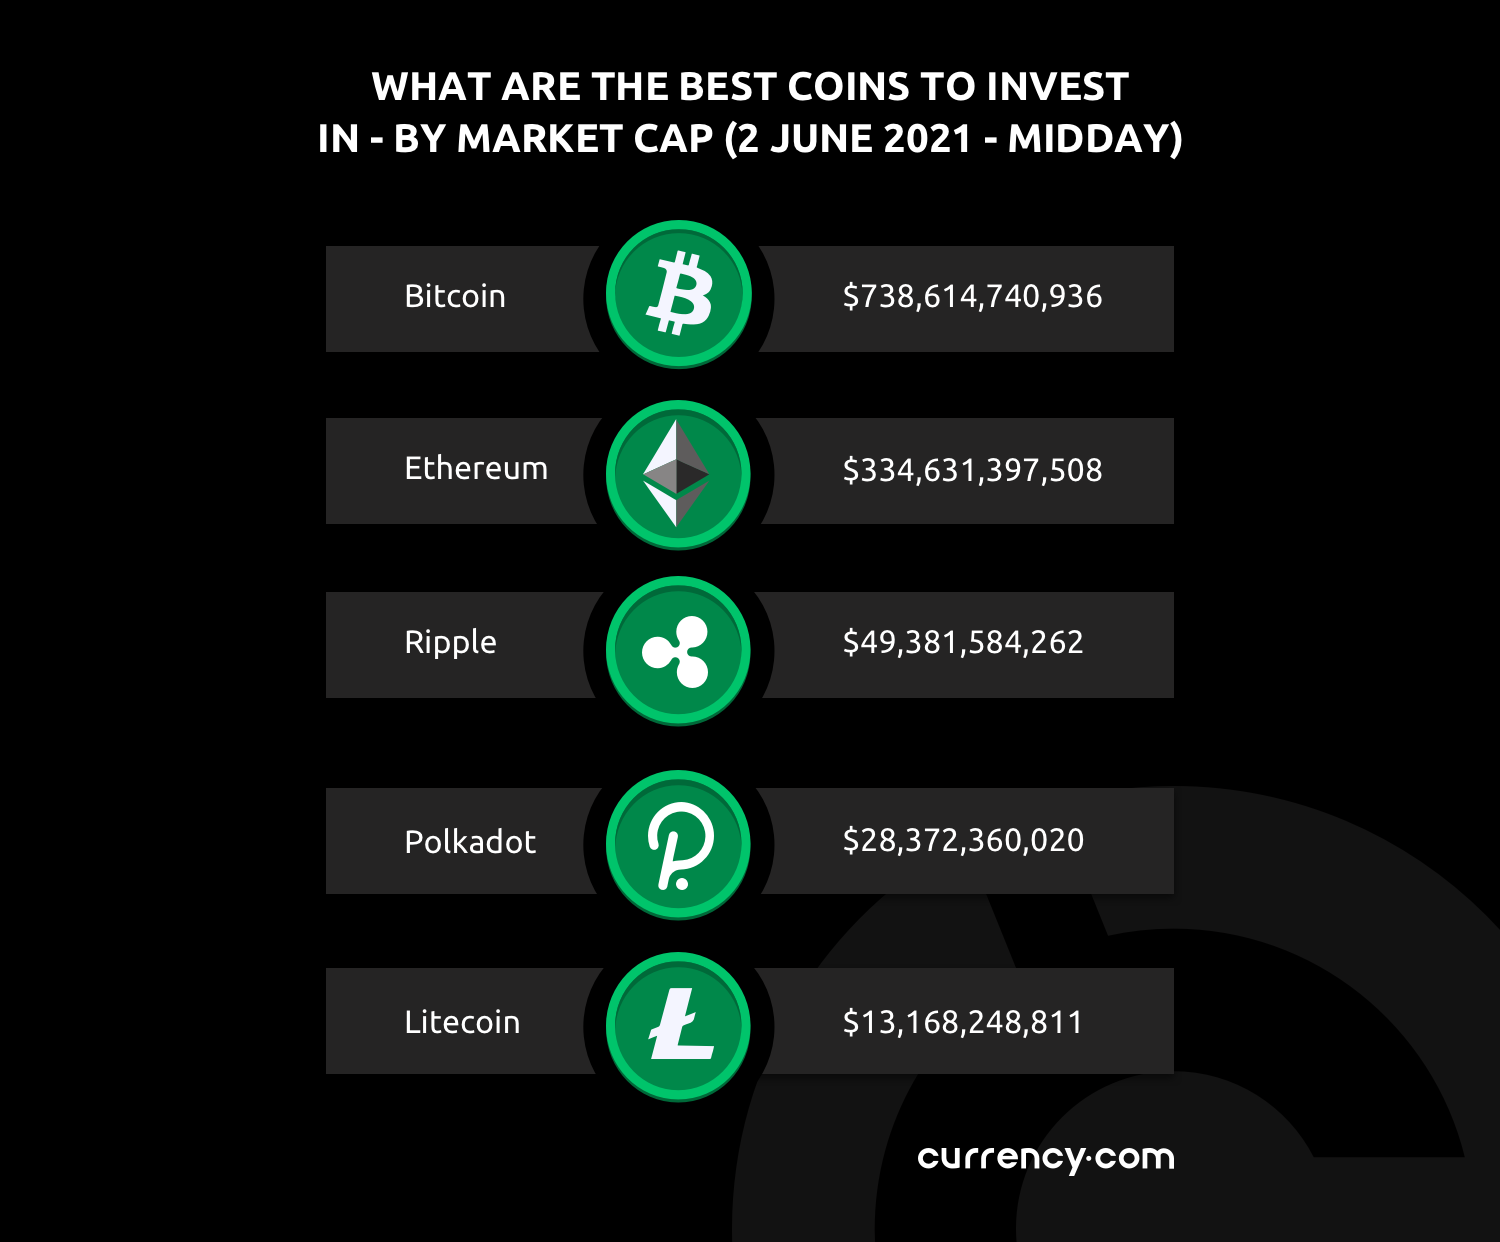 Bitcoin: would we invest your money in it?